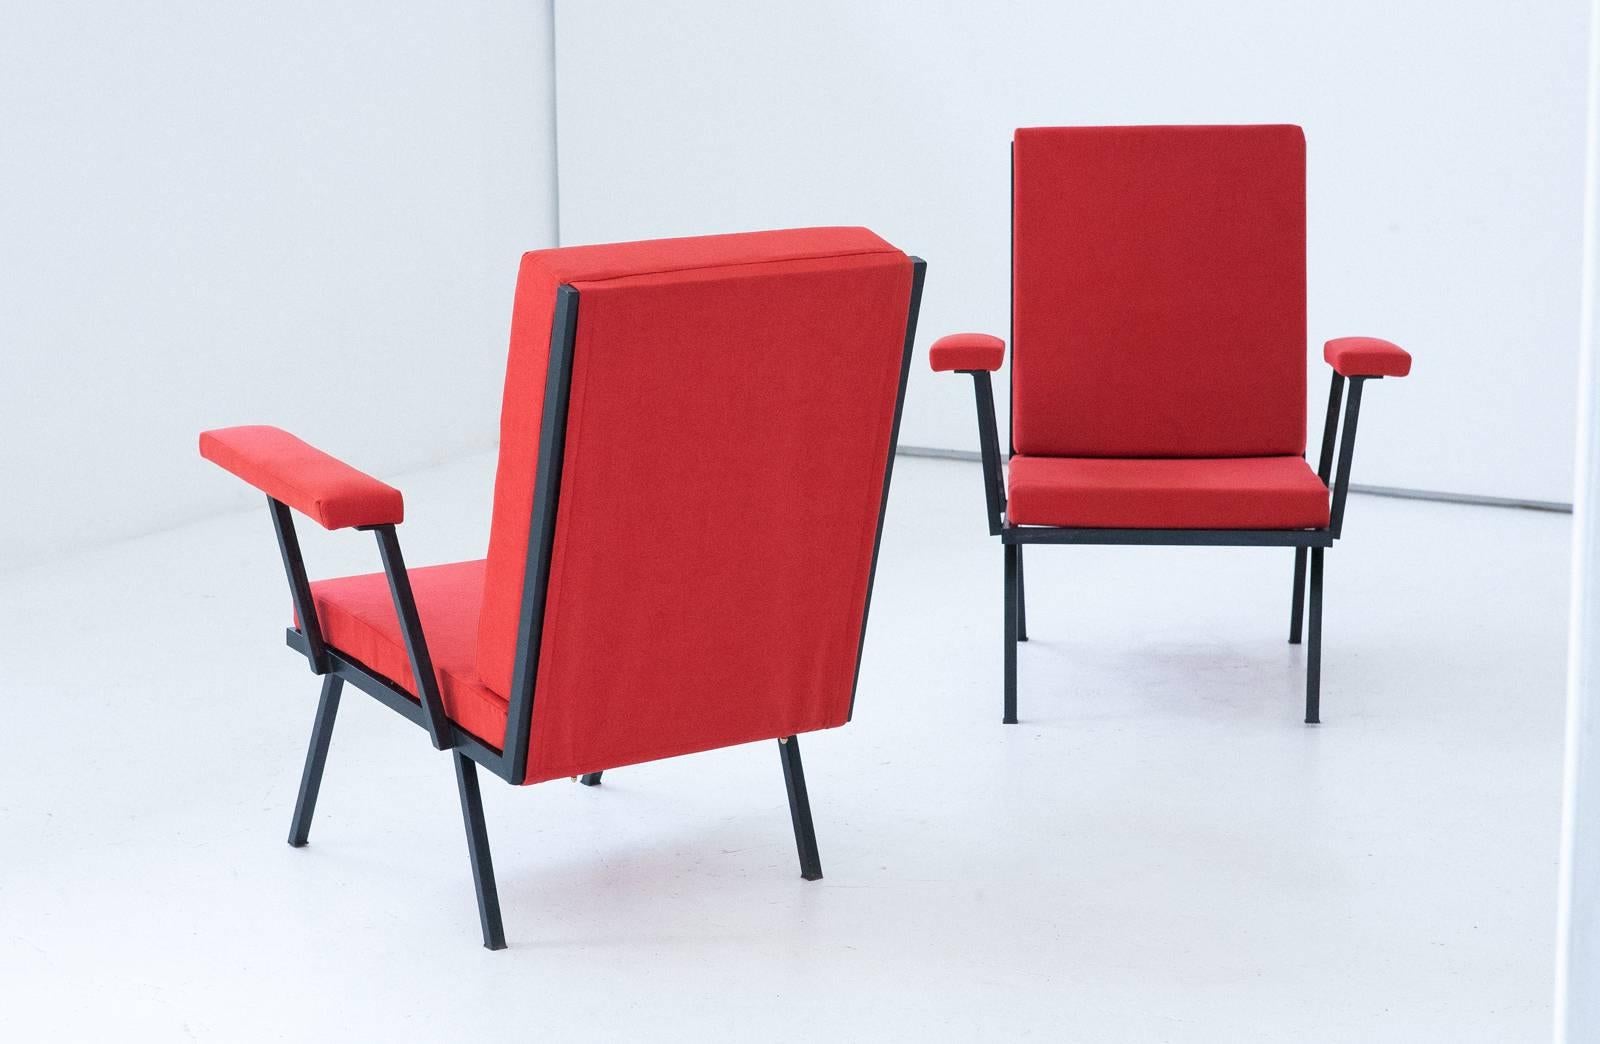 Italian modern armchairs from 1950s.
Black enameled iron and new red upholstery.
Completely restored
   